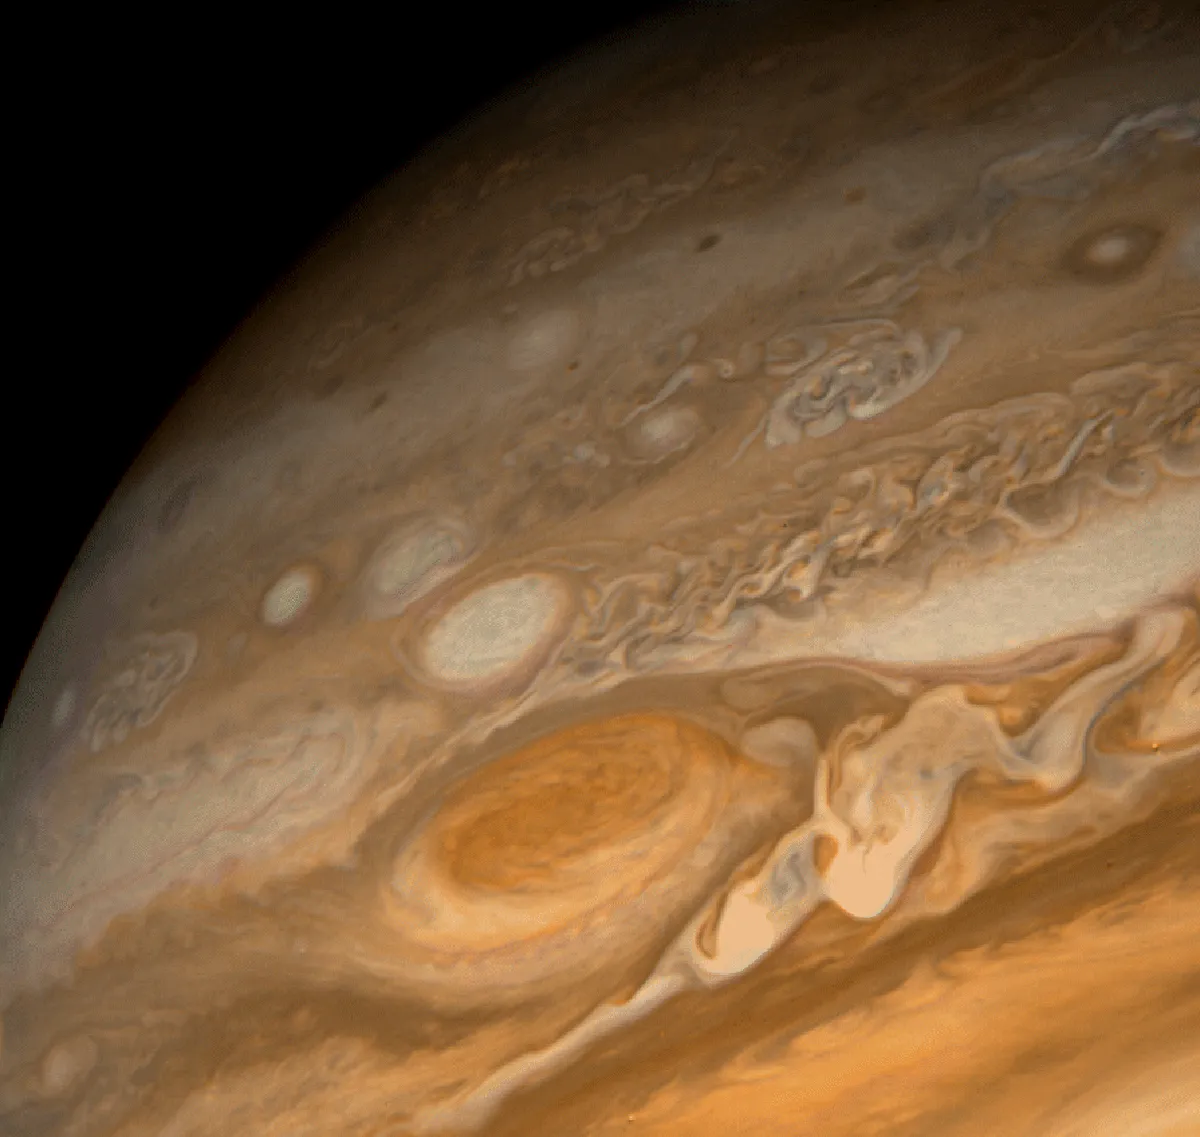  An image of Jupiter and its Great Red Spot, captured during the Voyager mission